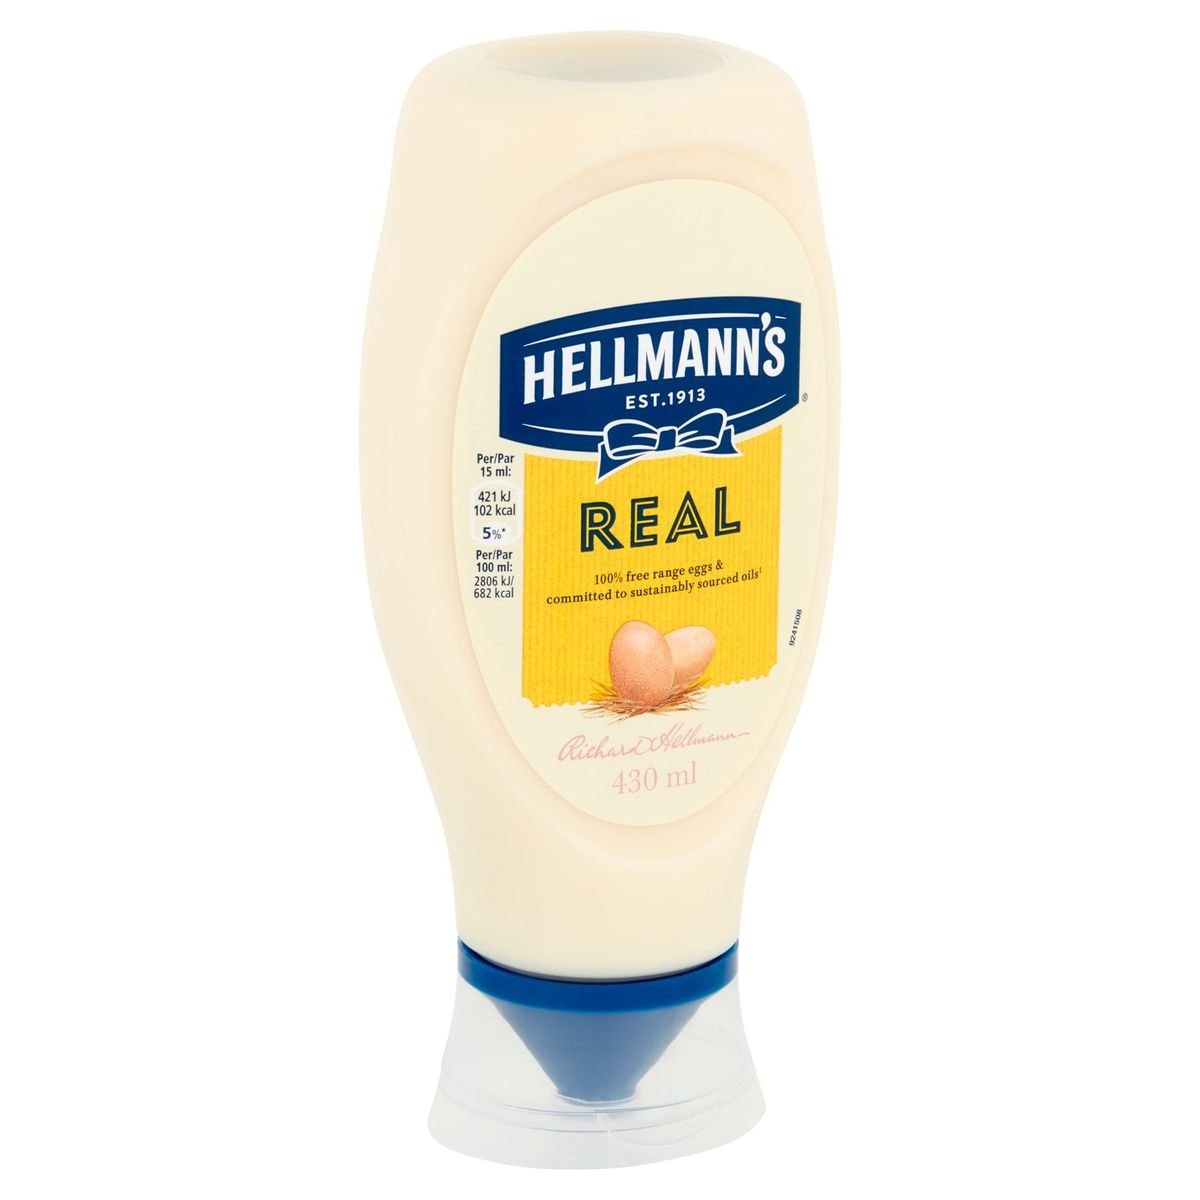 Hellmann's Real Squeeze Mayonaise Original 430 ml